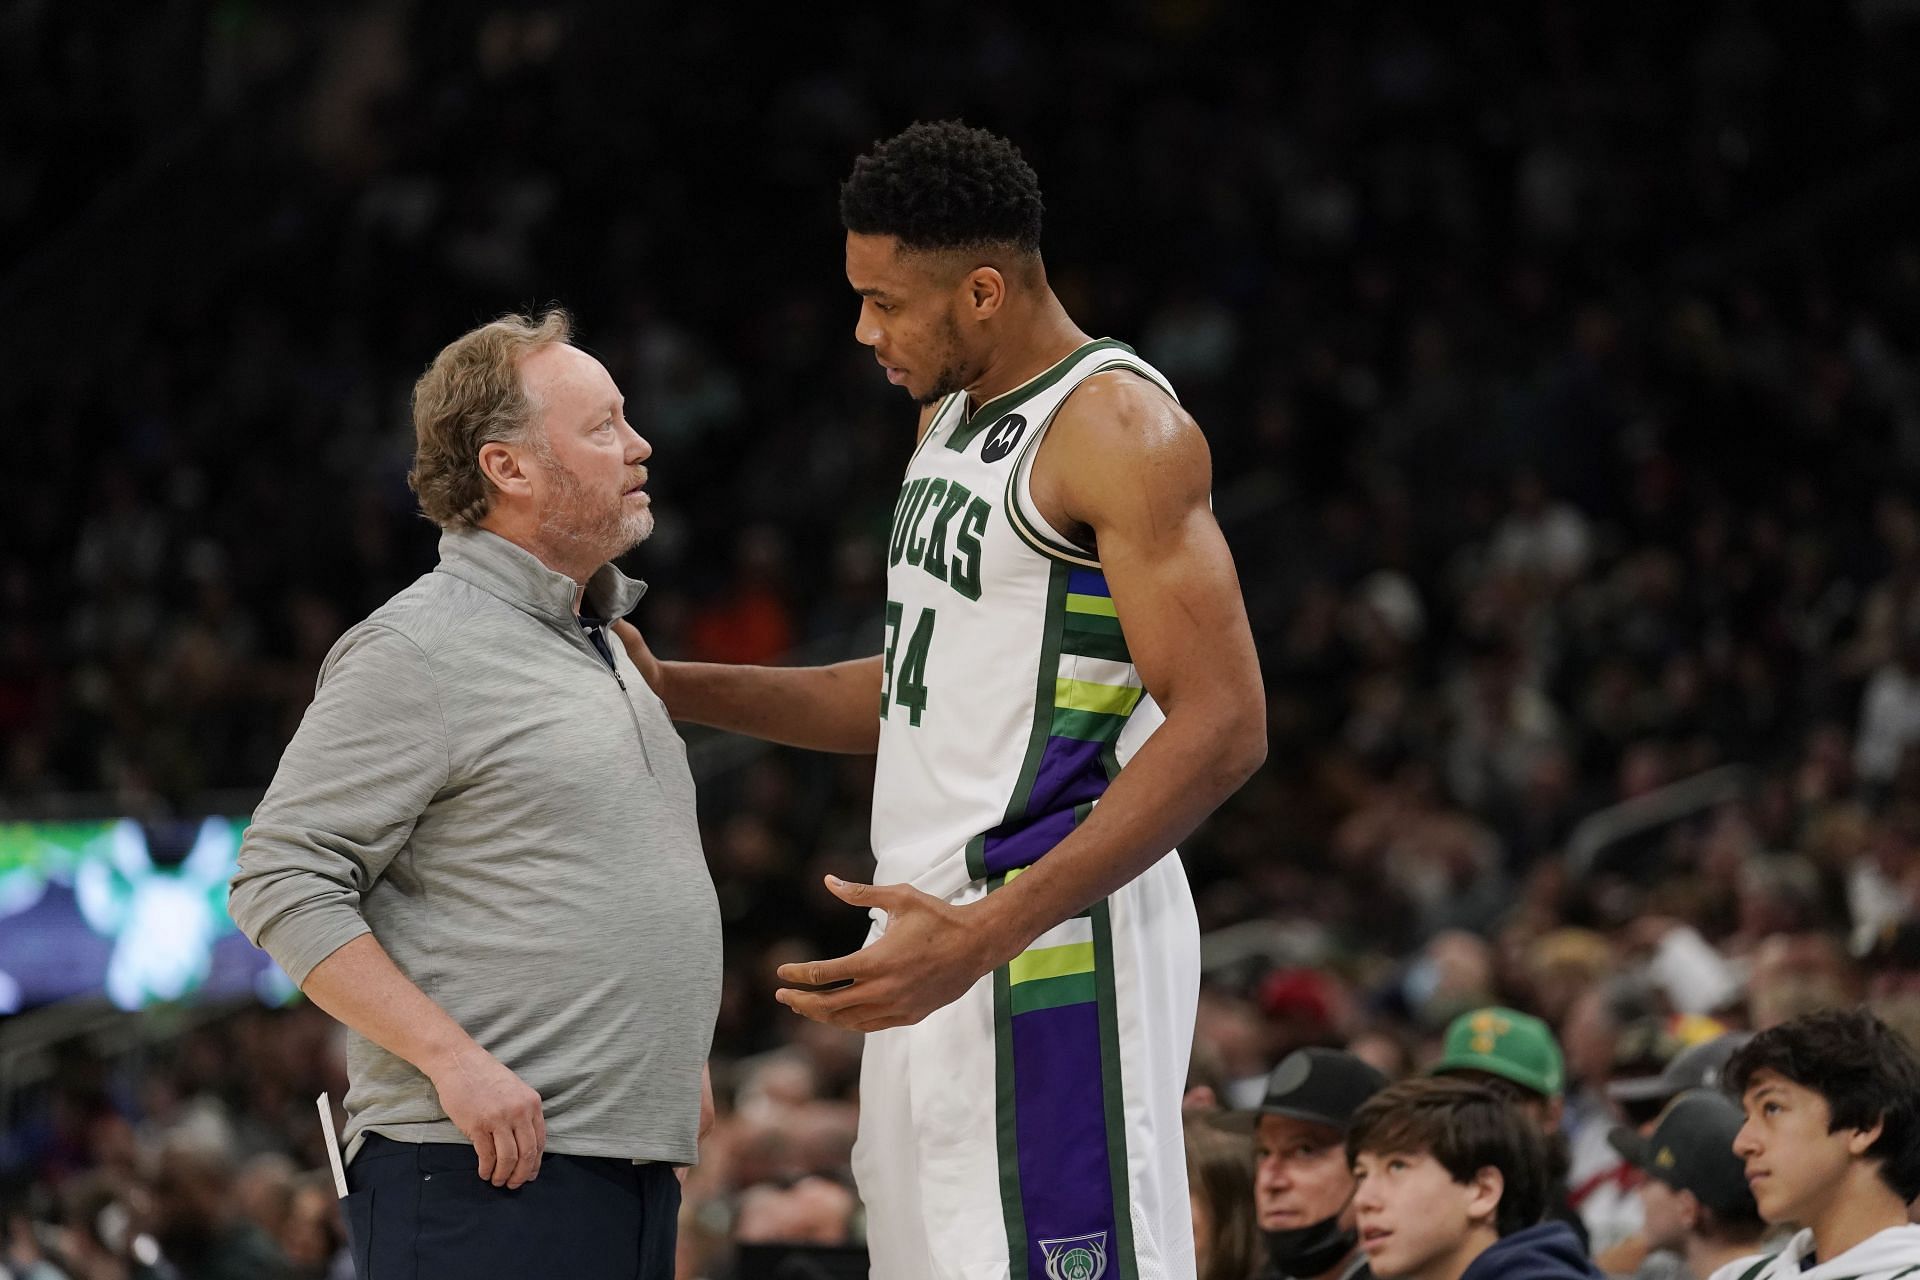 Mike Budenholzer and Giannis Antetokounmpo interact during an NBA game.